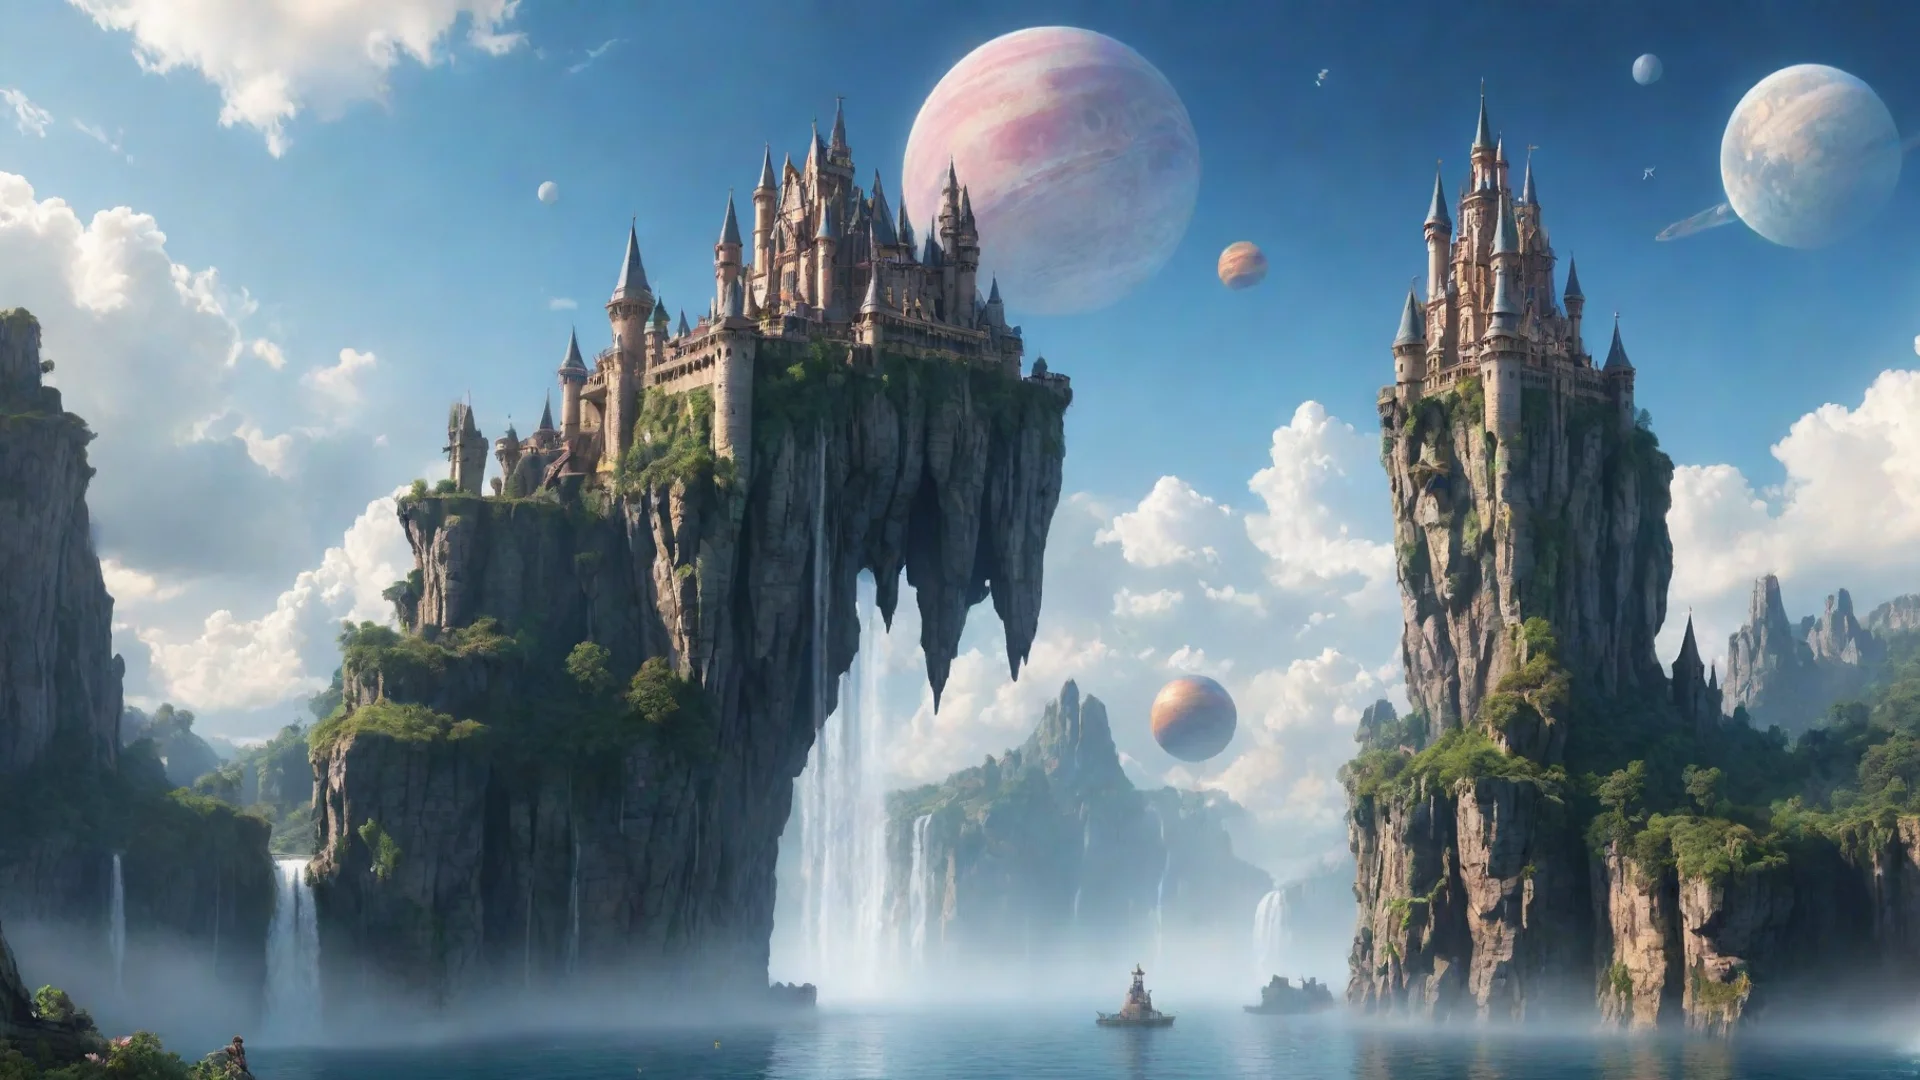 amazing peaceful castle in sky epic floating castle on floating cliffs with waterfalls down beautiful sky with saturn planets awesome portrait 2 wide